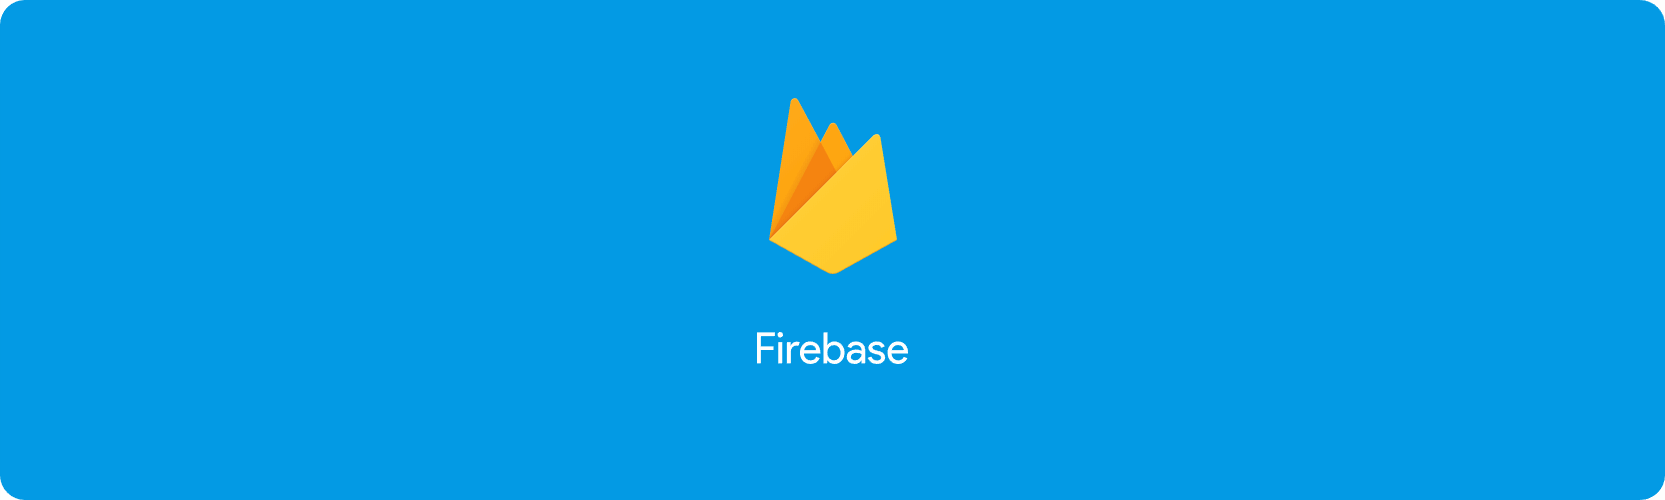 Awesome Firebase. 💬 List of Firebase talks, tools… | by James Hegedus |  codeburst